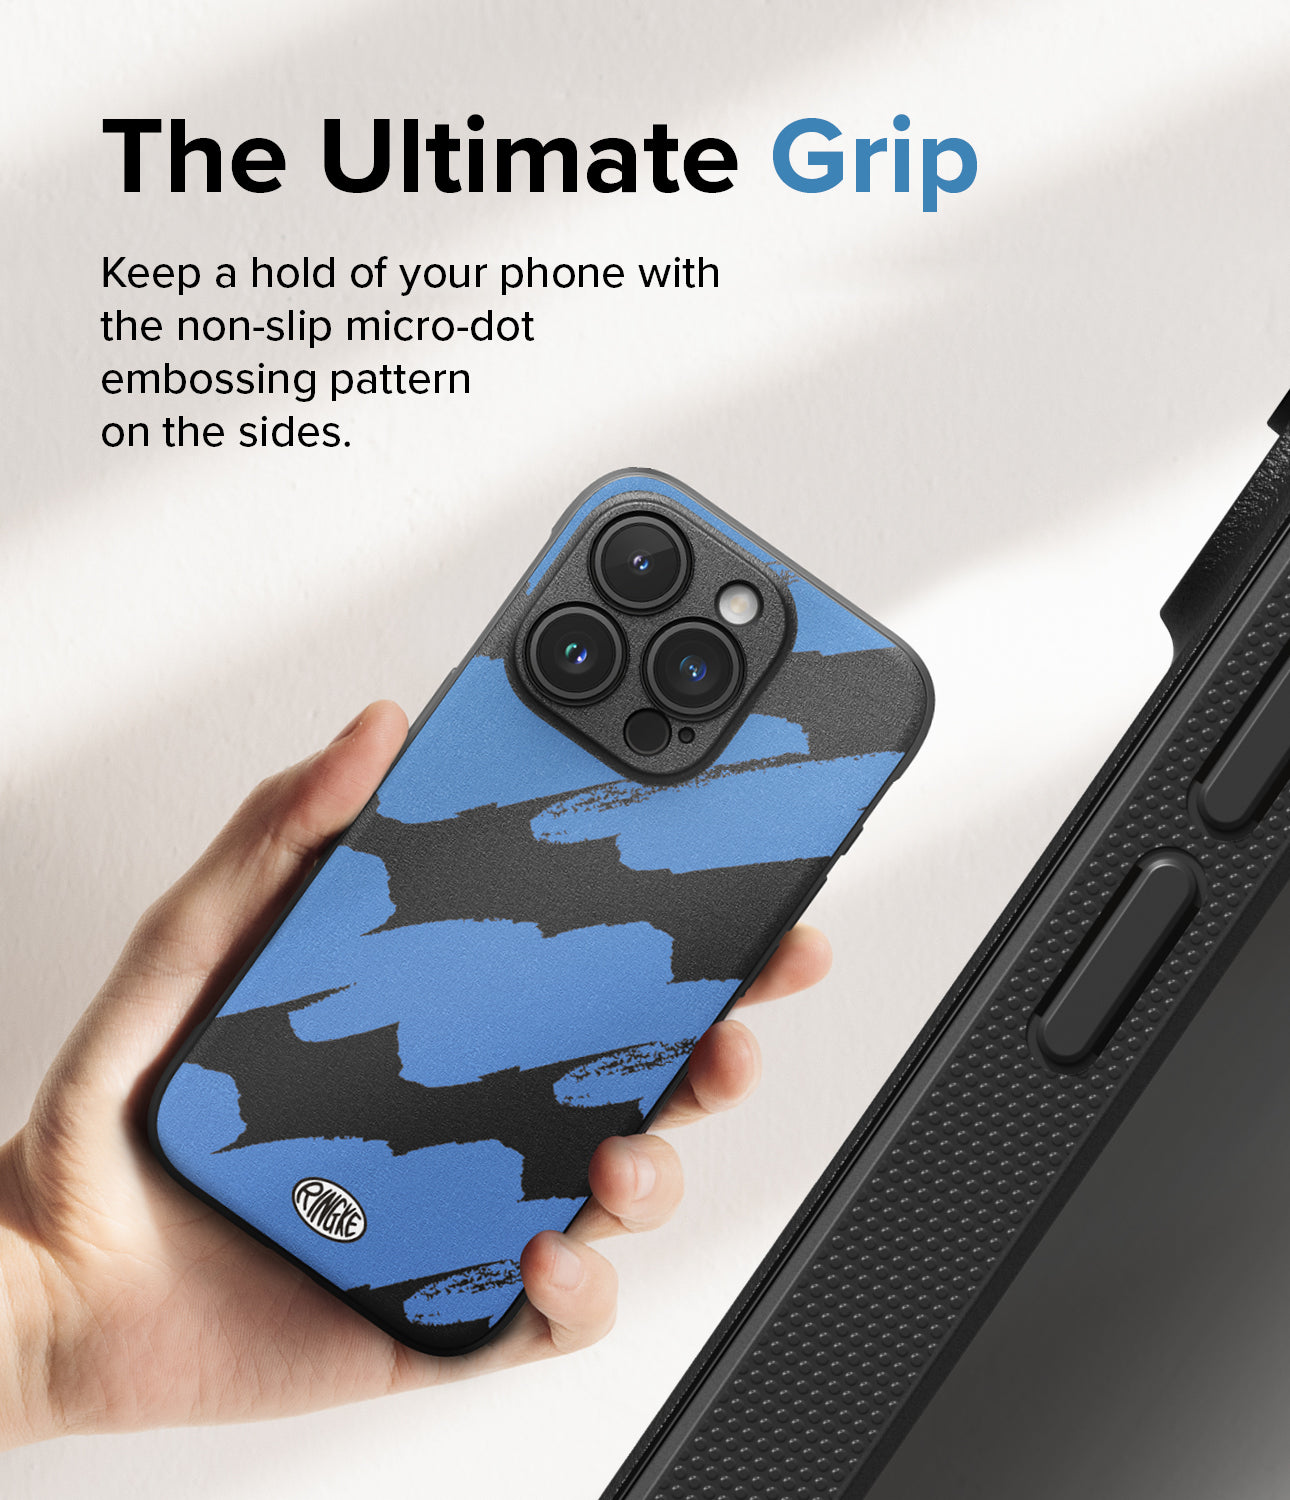 iPhone 15 Pro Max Case | Onyx Design - Blue Brush- The Ultimate Grip. Keep a hold of your phone with the non-slip micro-dot embossing pattern on the sides.